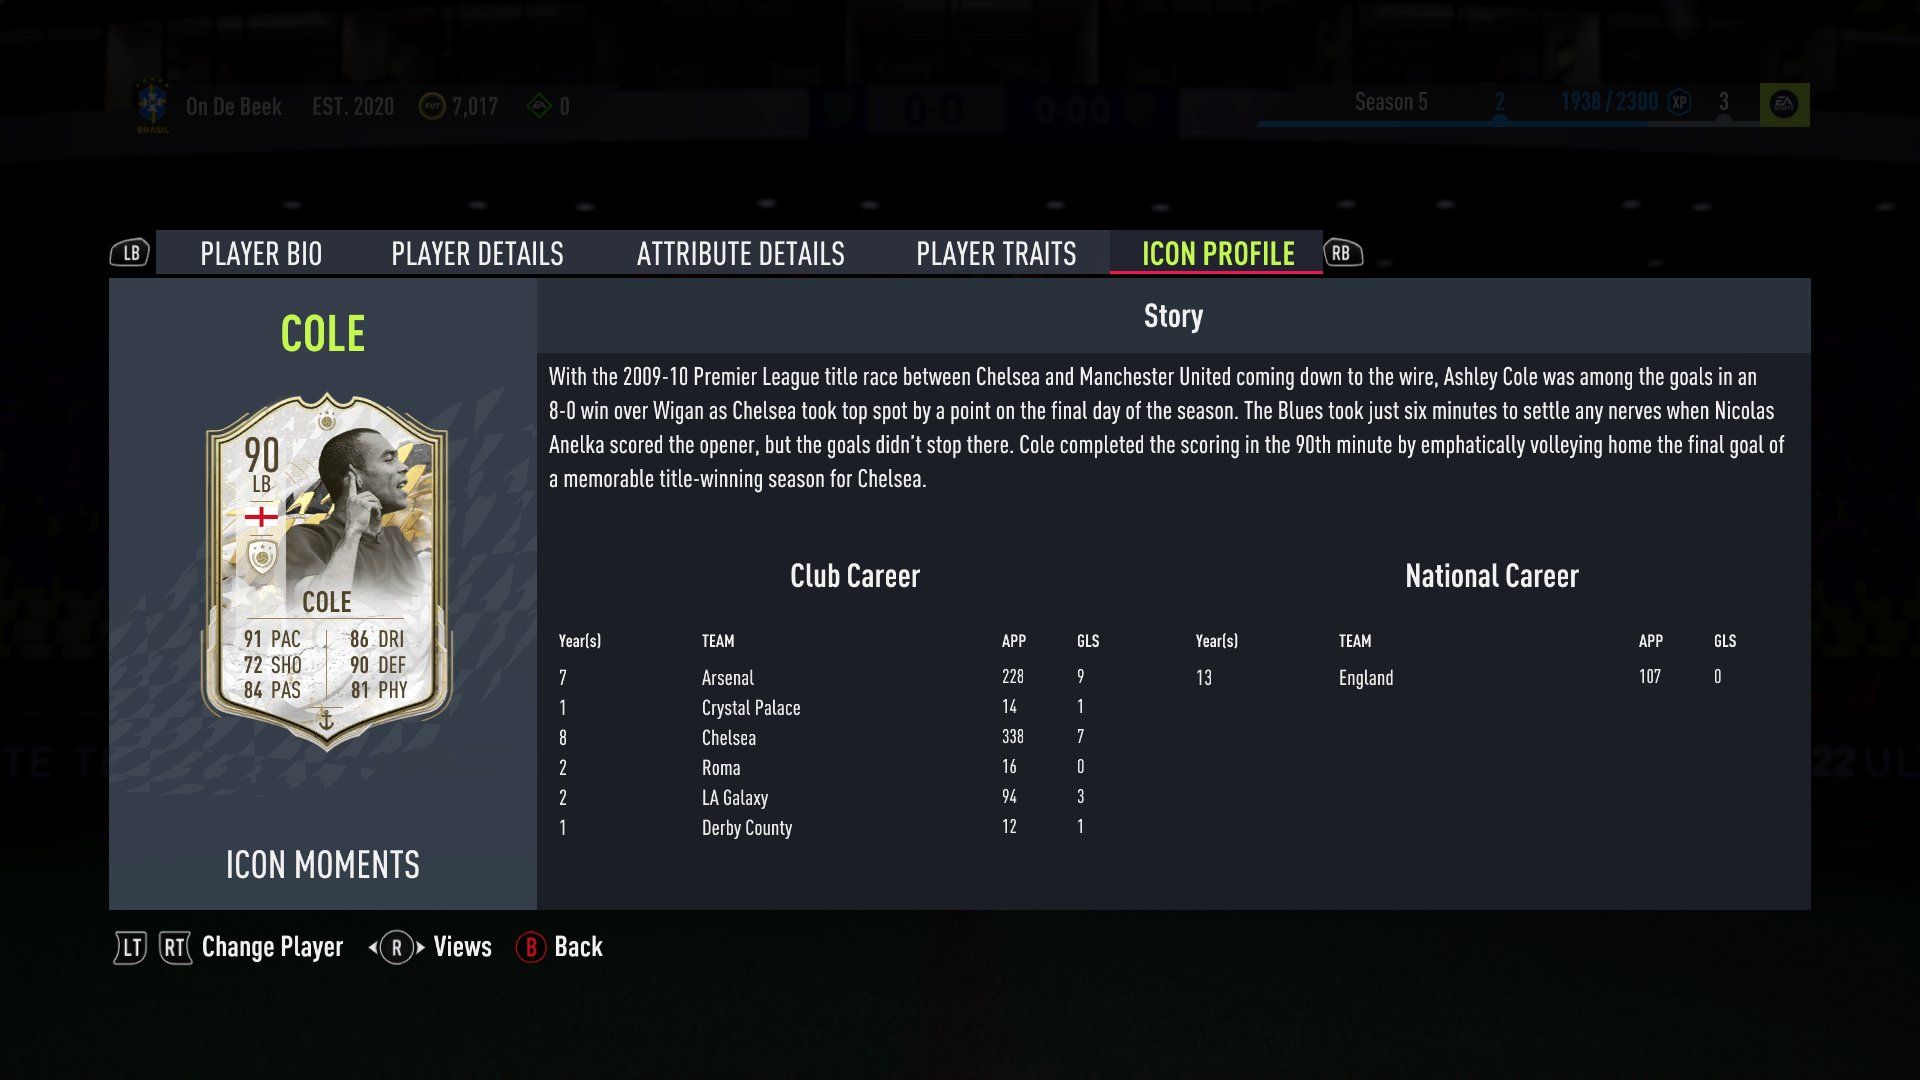 Ashley Cole Prime Icon Moments card with the reason why he got it and his career stats.